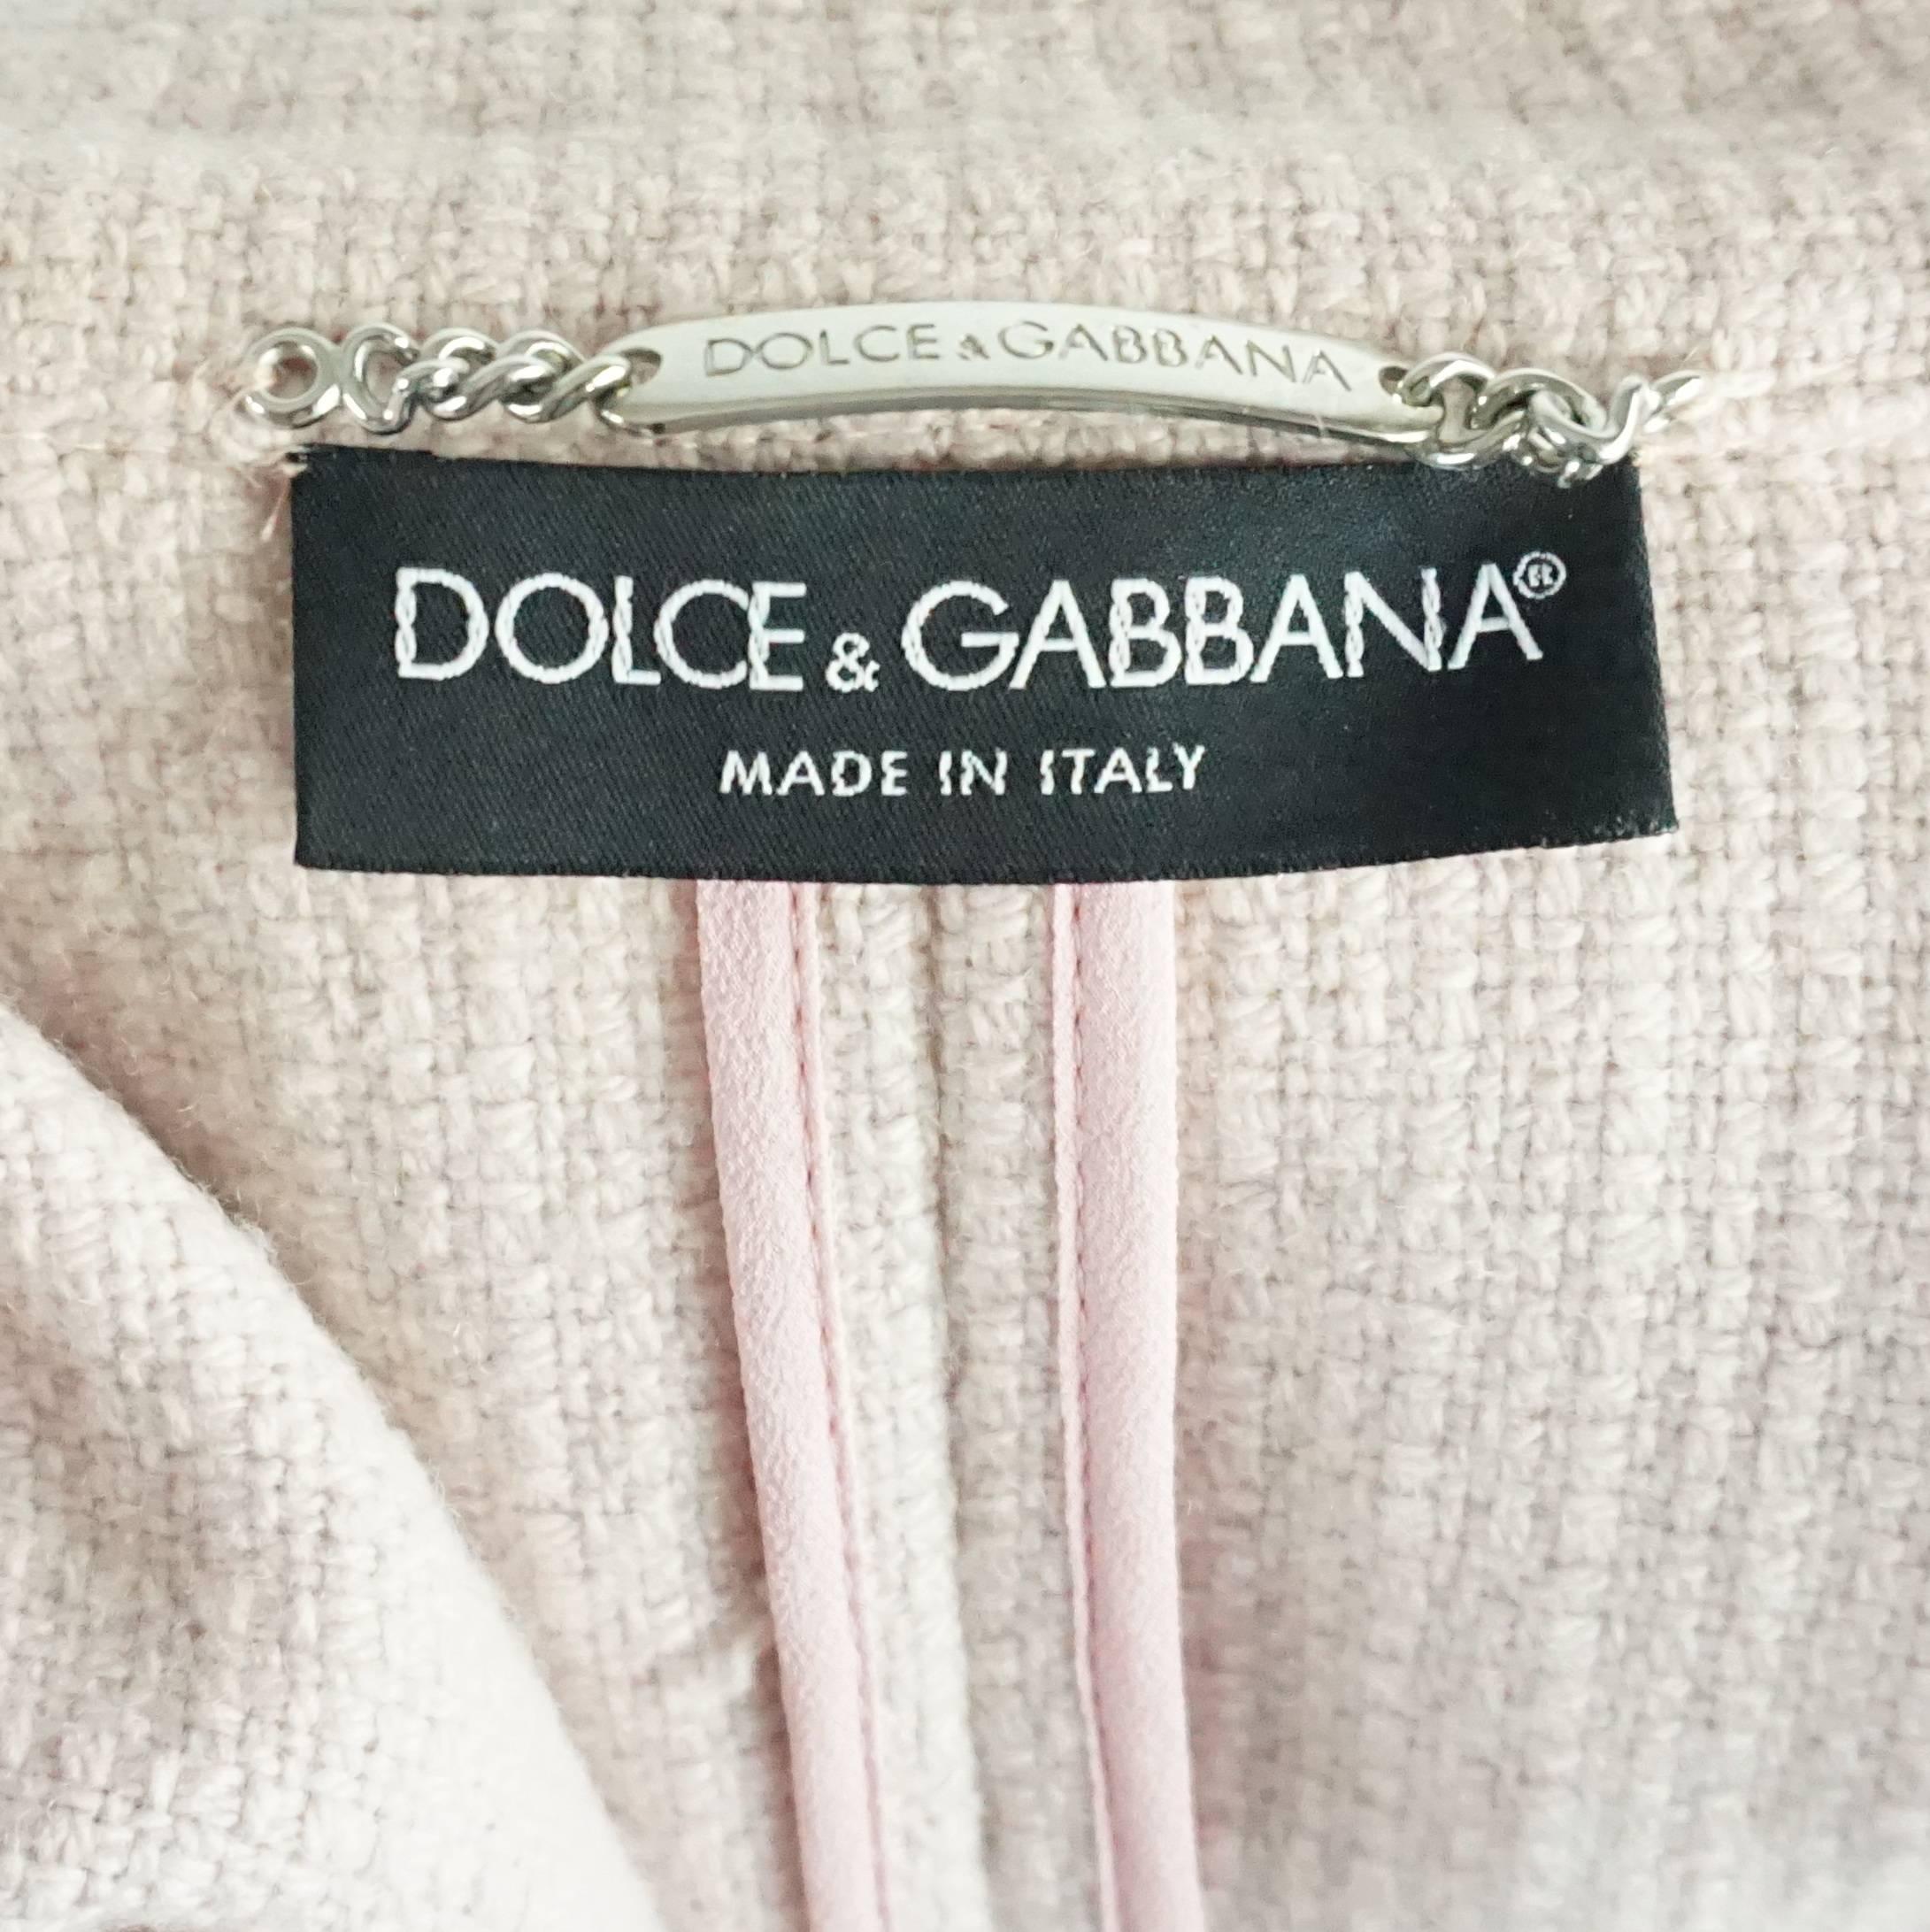 Dolce & Gabbana Pink Tweed Skirt Suit with a Rhinestone Logo Trim - Size 44 For Sale 2